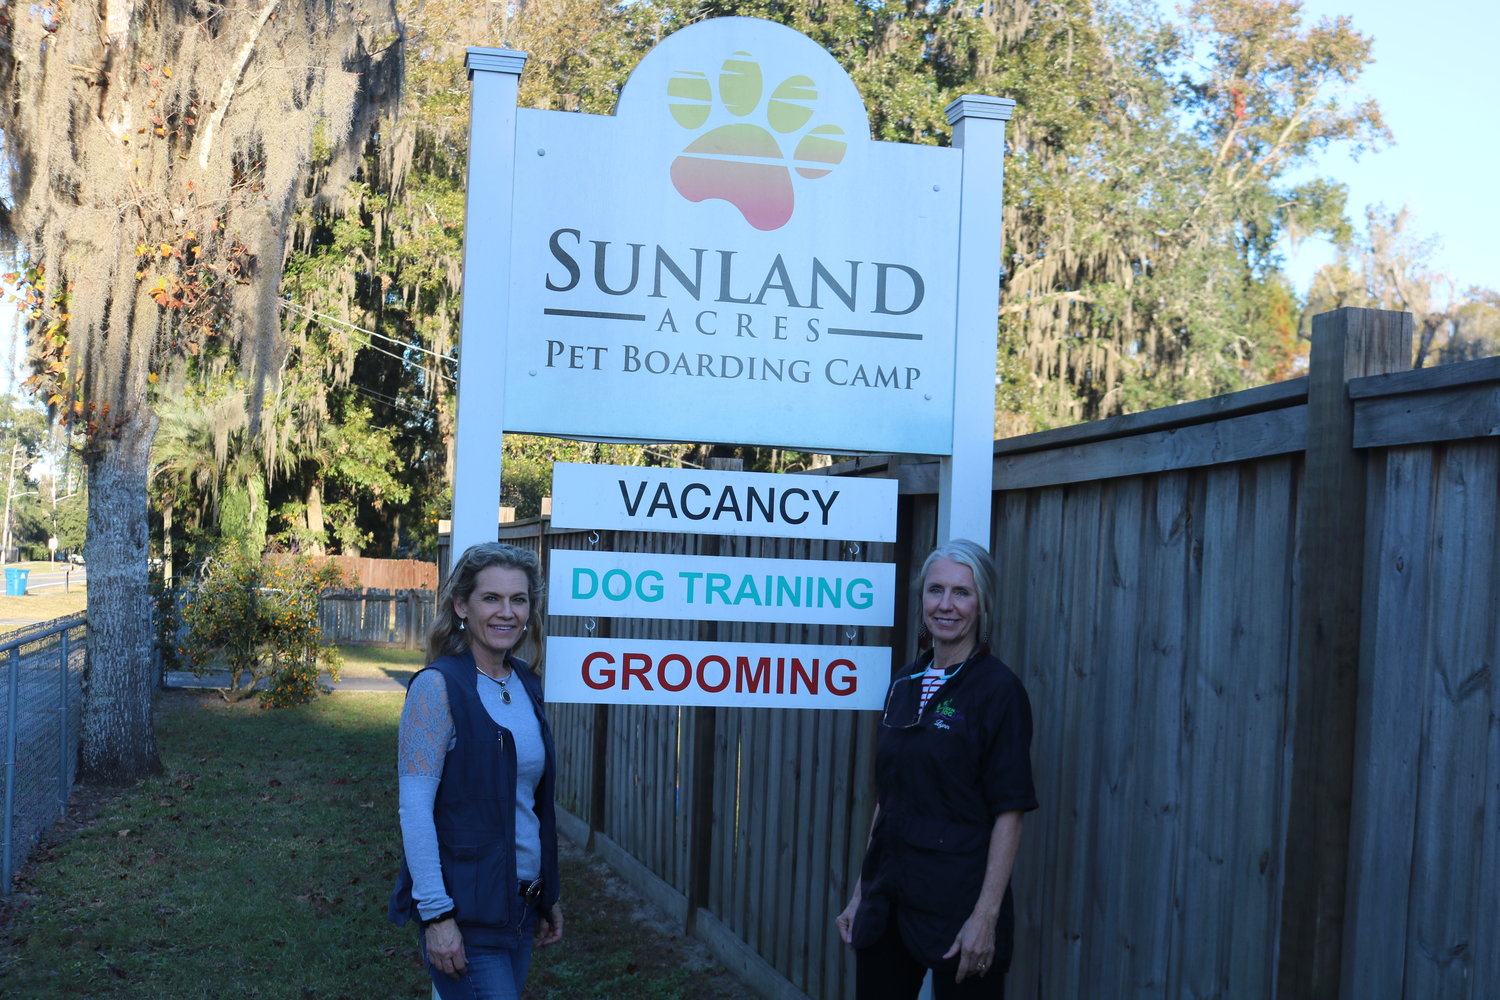 Sunland Acres Pet Boarding offers grooming and dog training as part of its list of available services.